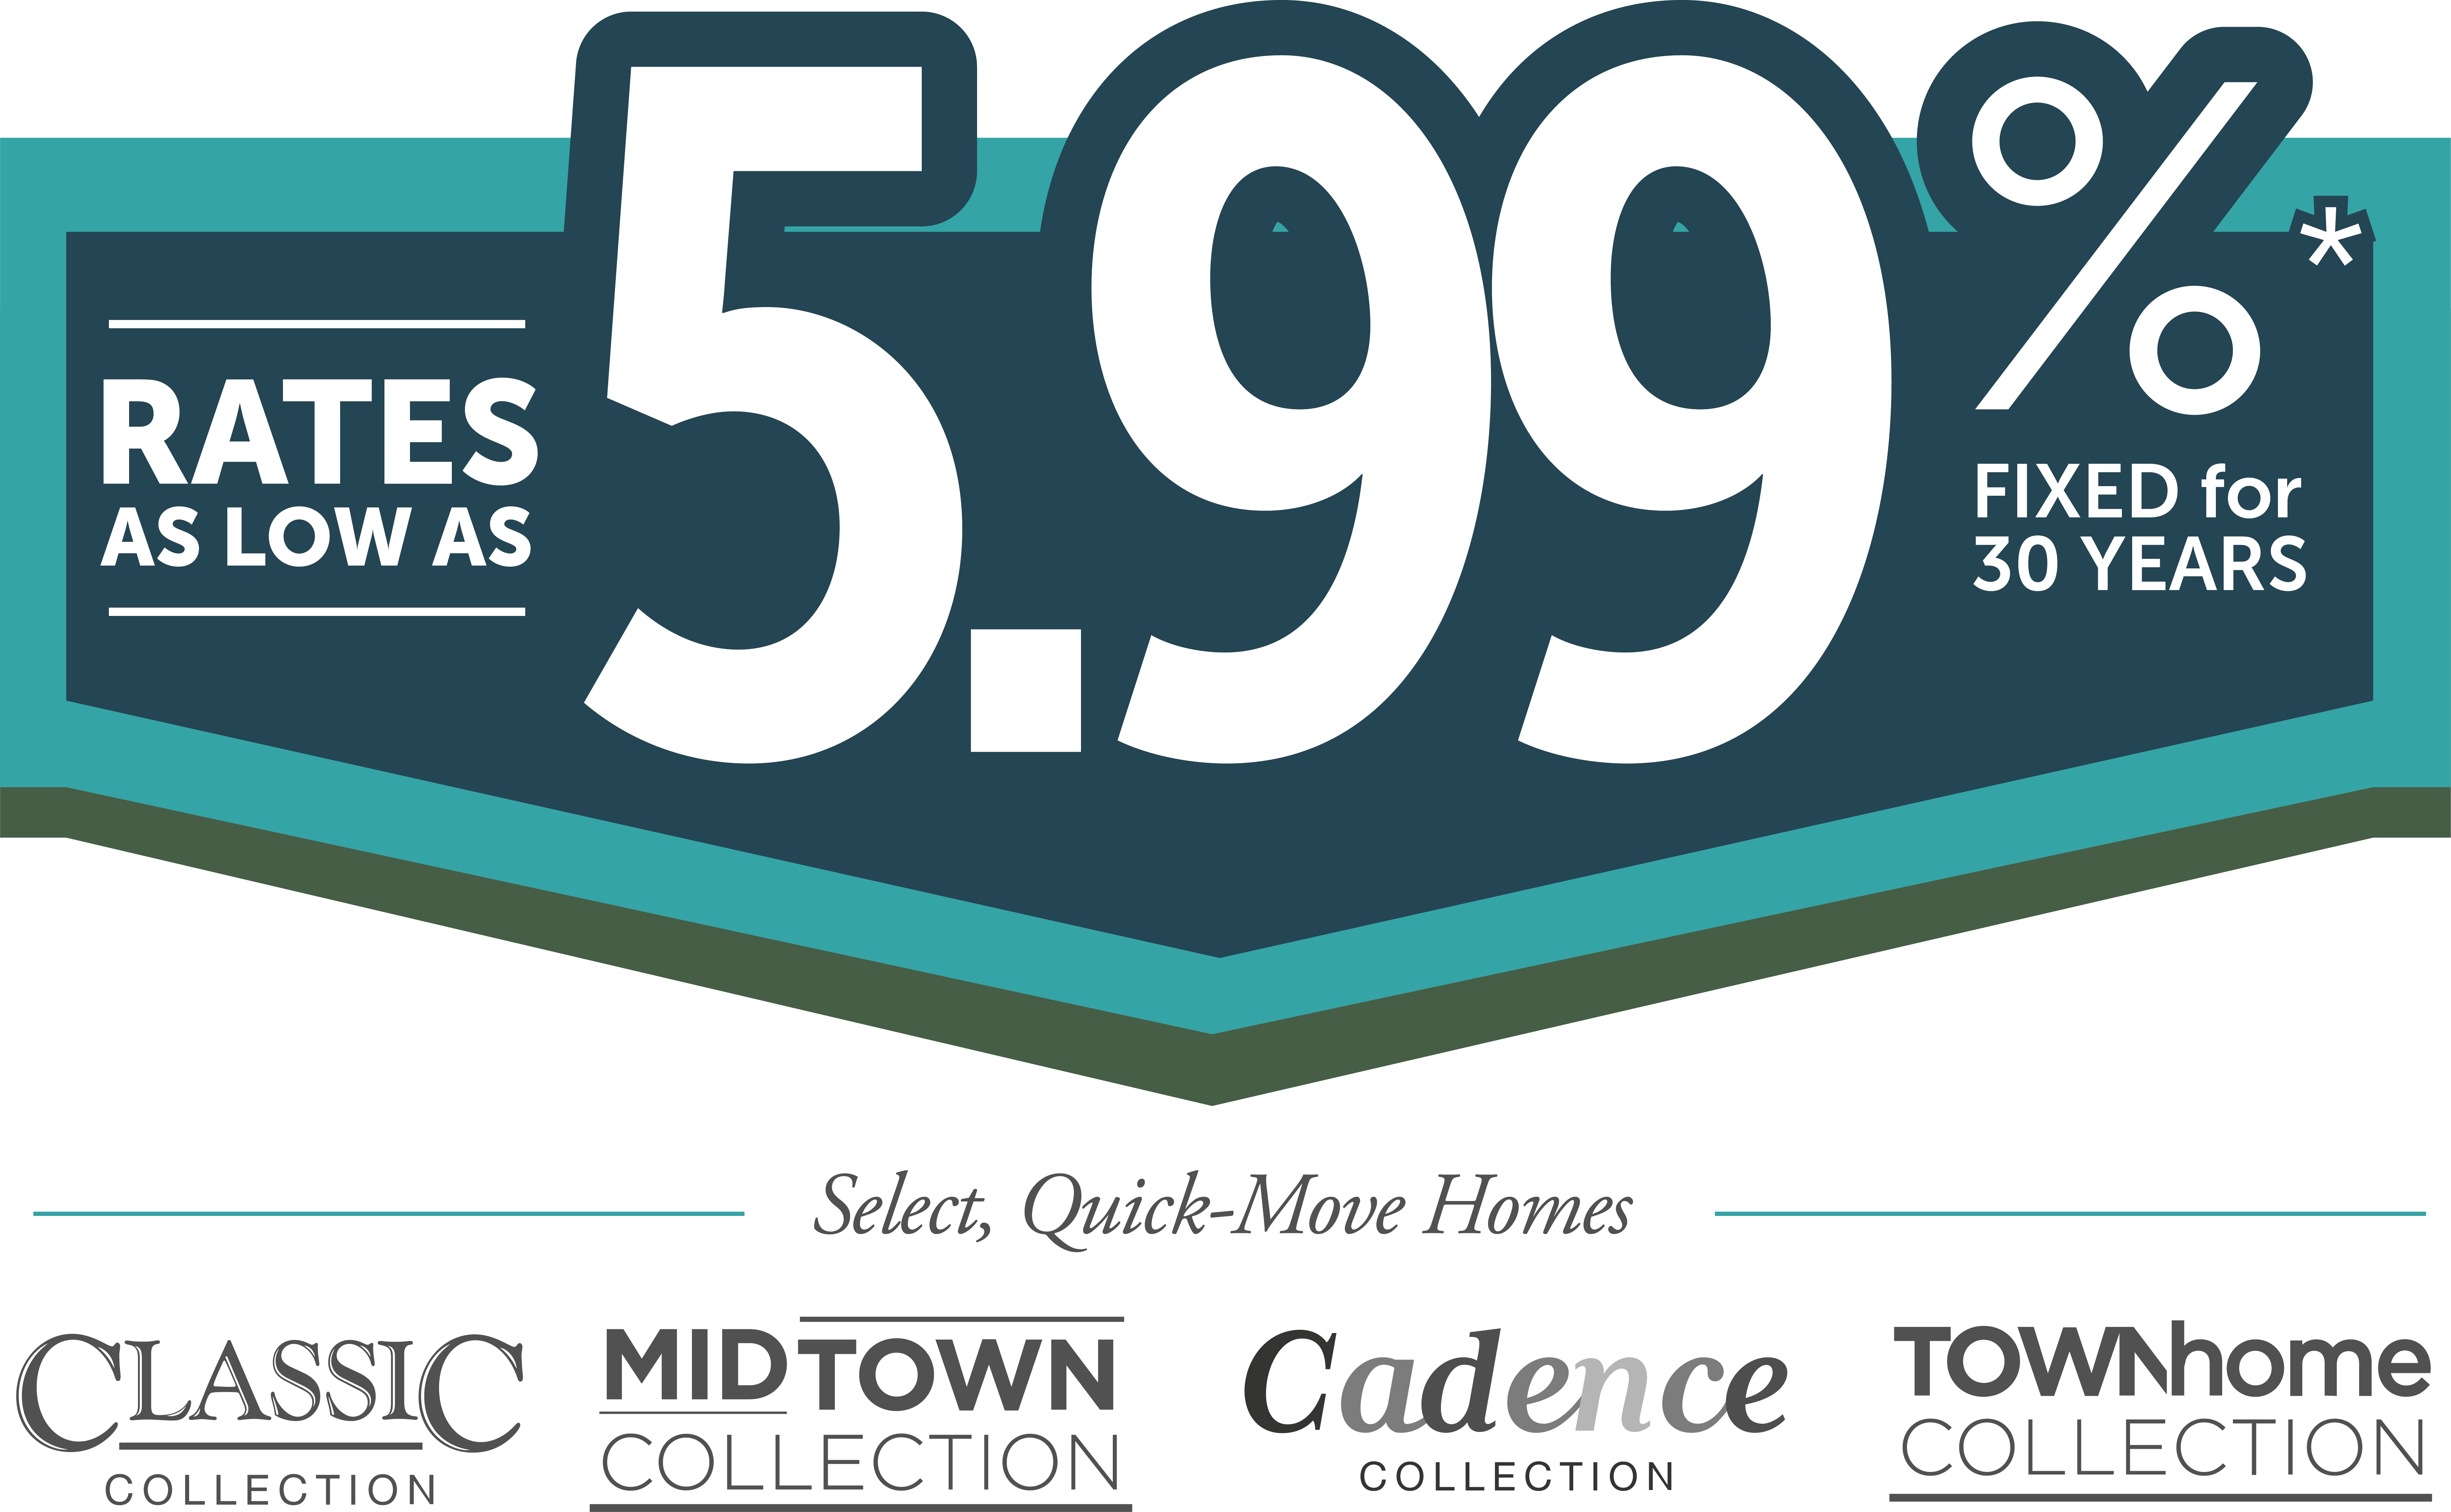 Limited-Time 5.5% Fixed Rate